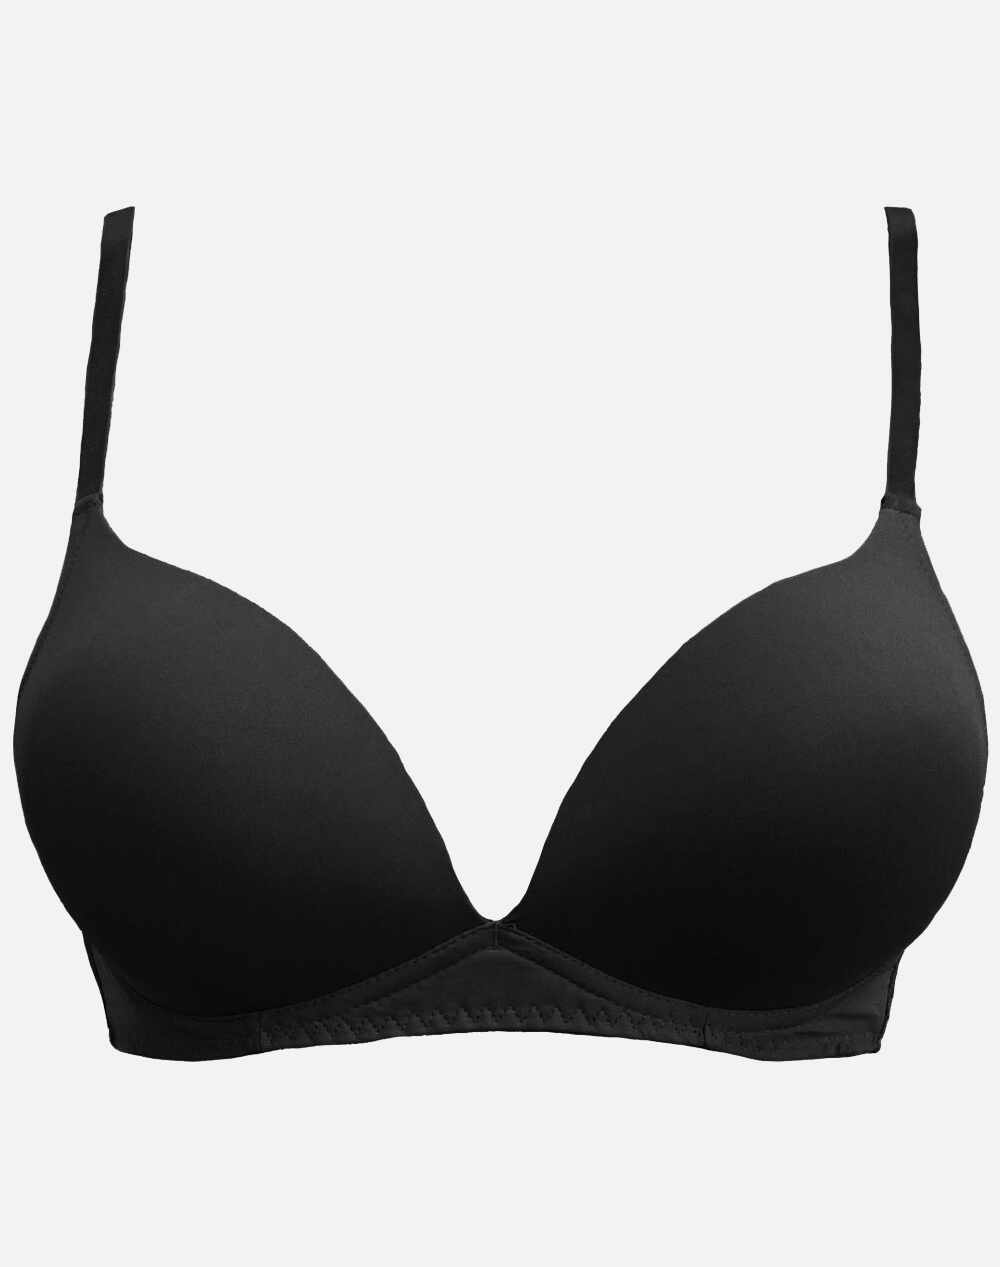 SOLANO Sutien Push Up Cup B&C - The Sienna